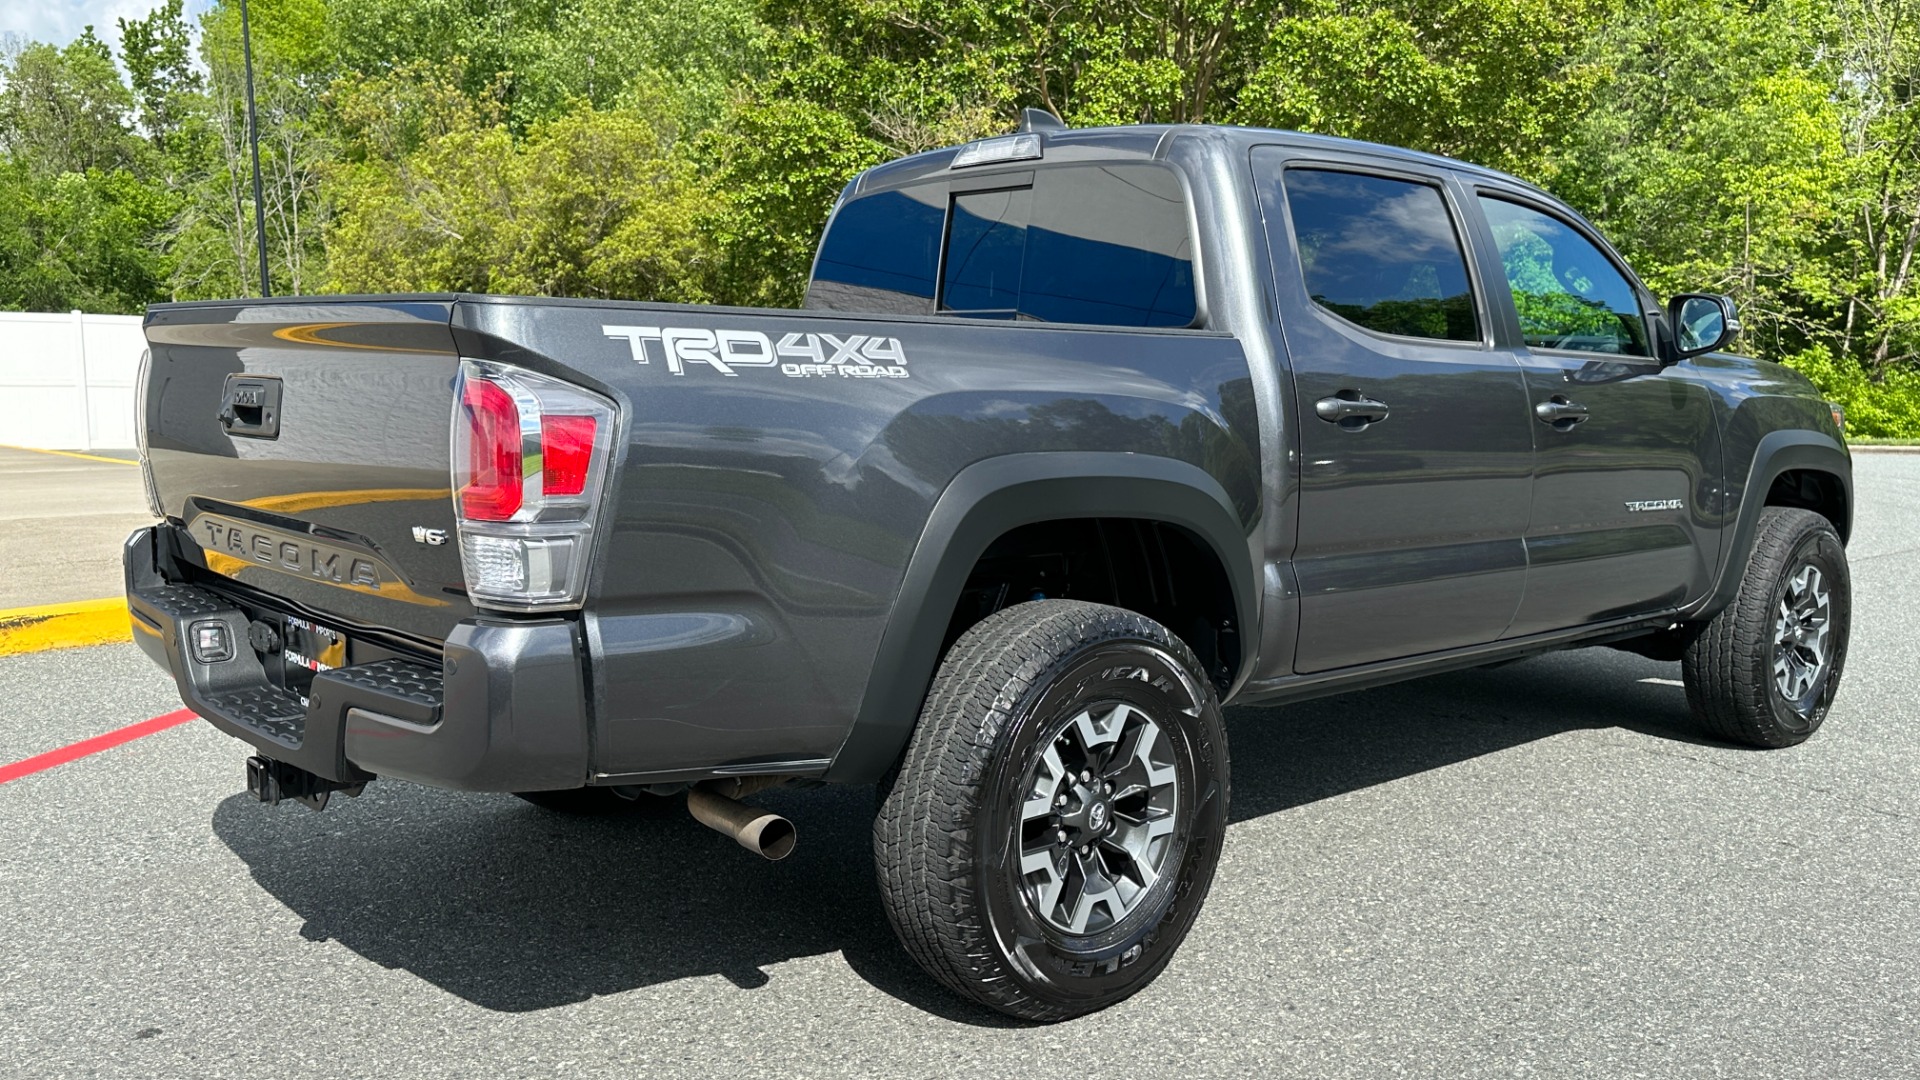 Used 2020 Toyota Tacoma 4WD TRD OFFROAD PREMIUM / 4WD / CONVENIENCE PACKAGE / LEATHER / NAVIGATION for sale $38,995 at Formula Imports in Charlotte NC 28227 4